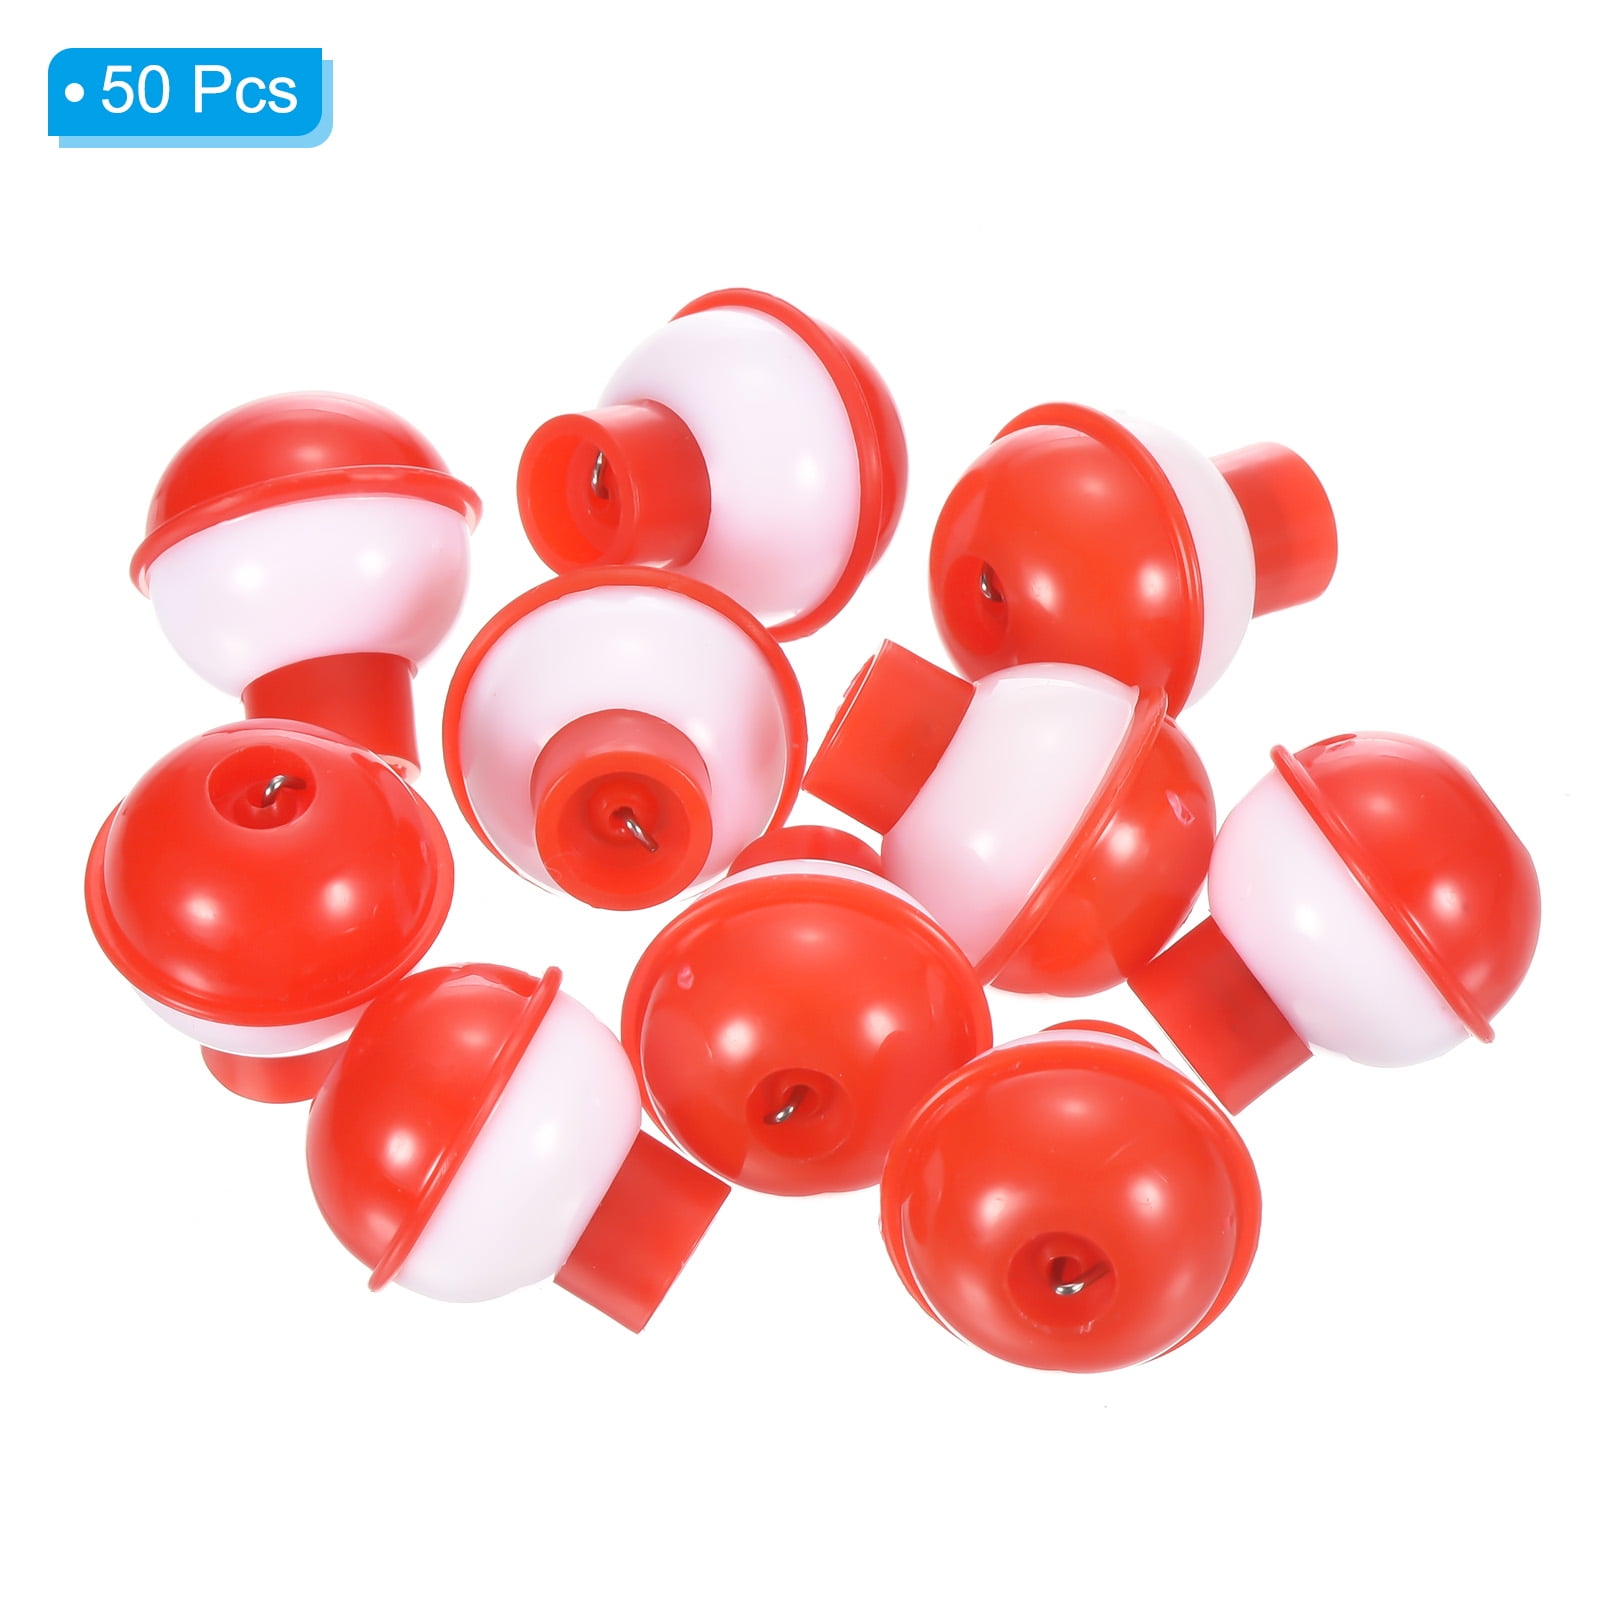 Paladin Crystal Clear Plastic Fishing Float Bobbers 25gr Red